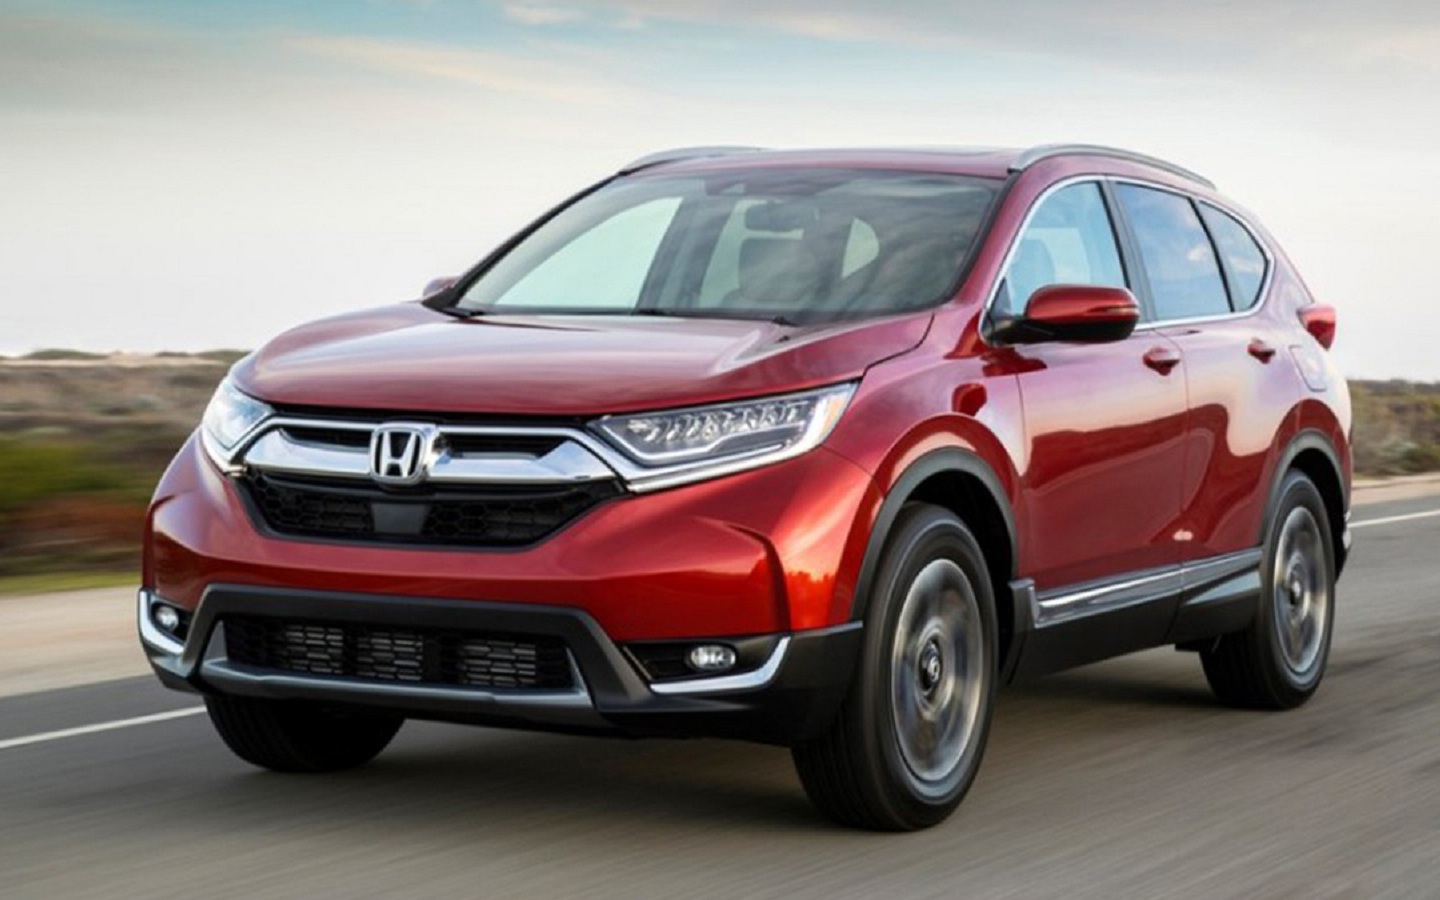 Common mistakes on Honda CR-V that users need to know